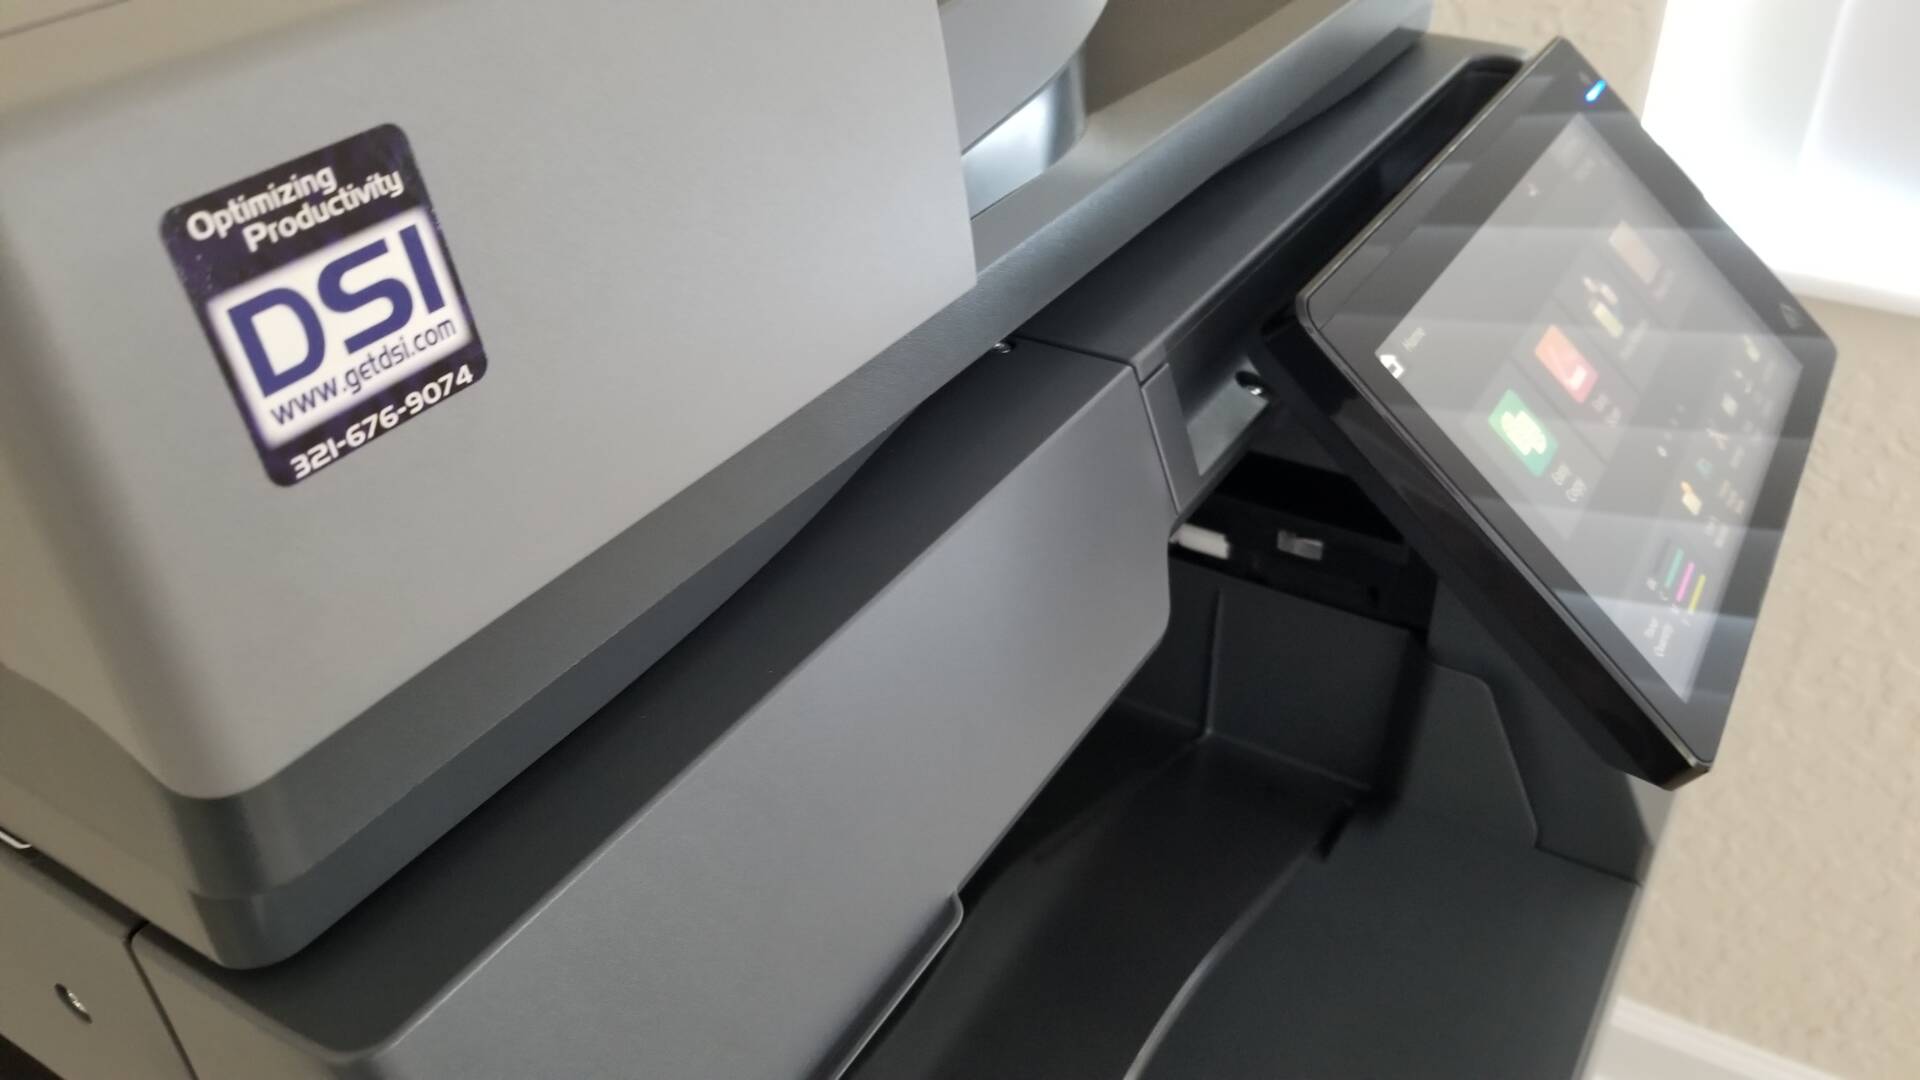 Benefits of Commercial Laser Copiers/Printers vs Inkjet Home Office Printers